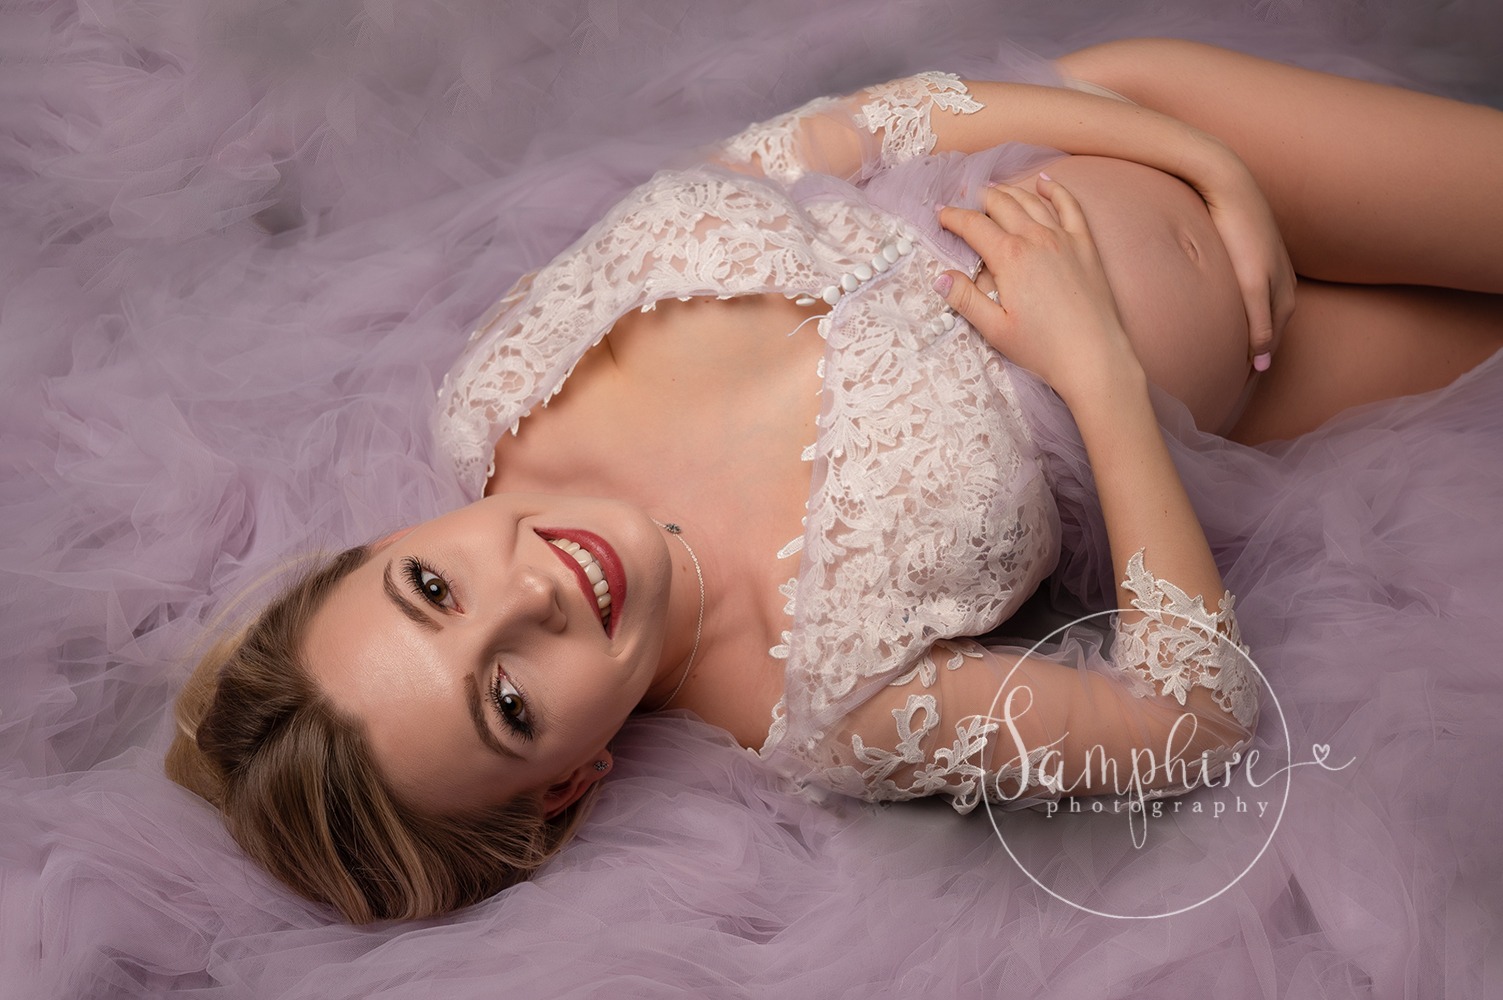 blooming pregnancy lady in a portrait taken by horsham photographer samphire photography